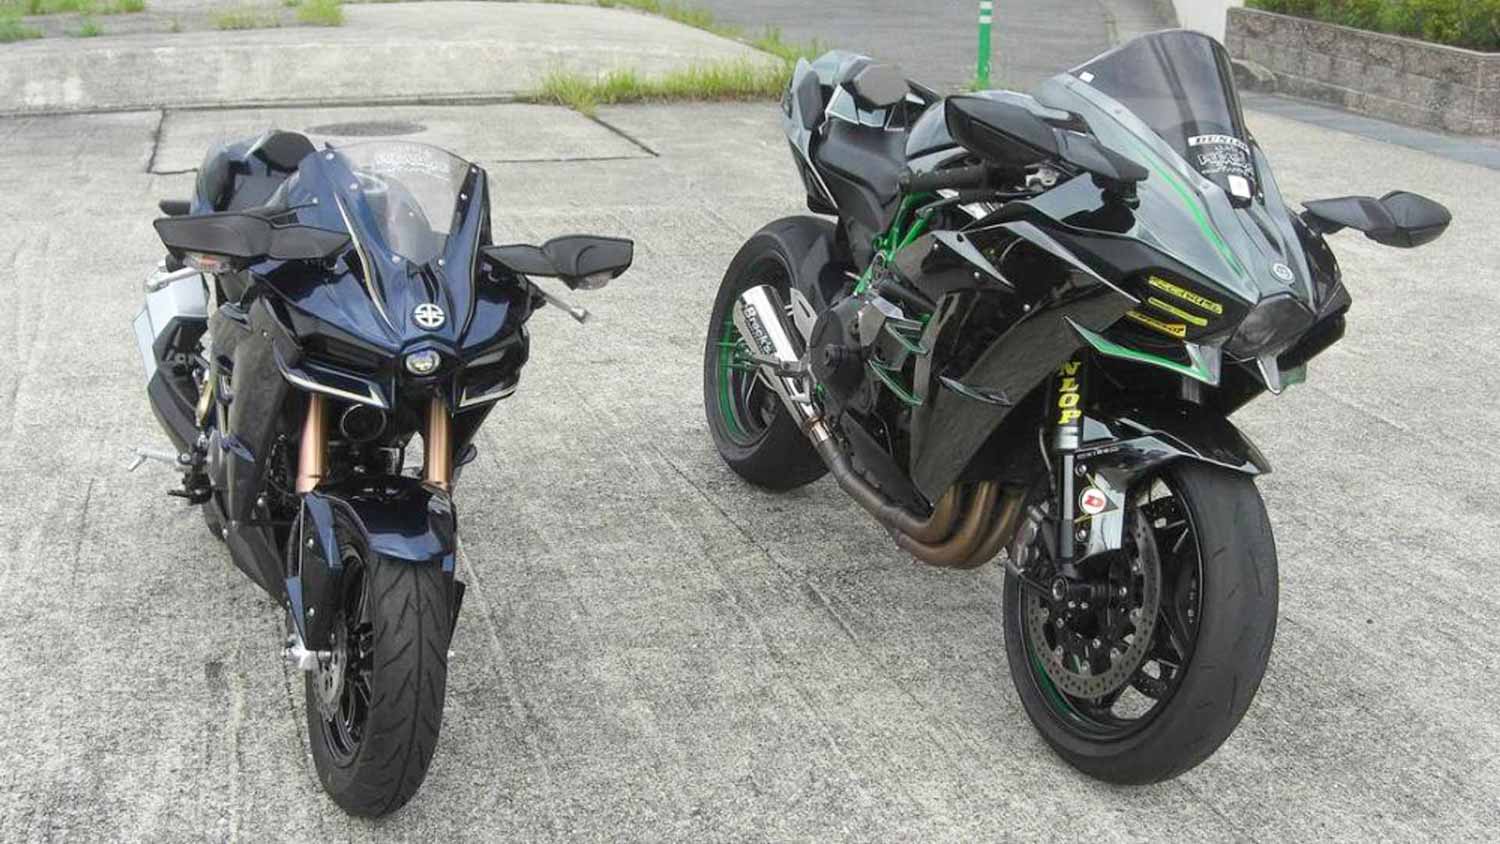 Z125 Pro Transformed Into A Fully-Faired Ninja H2 Look-Alike